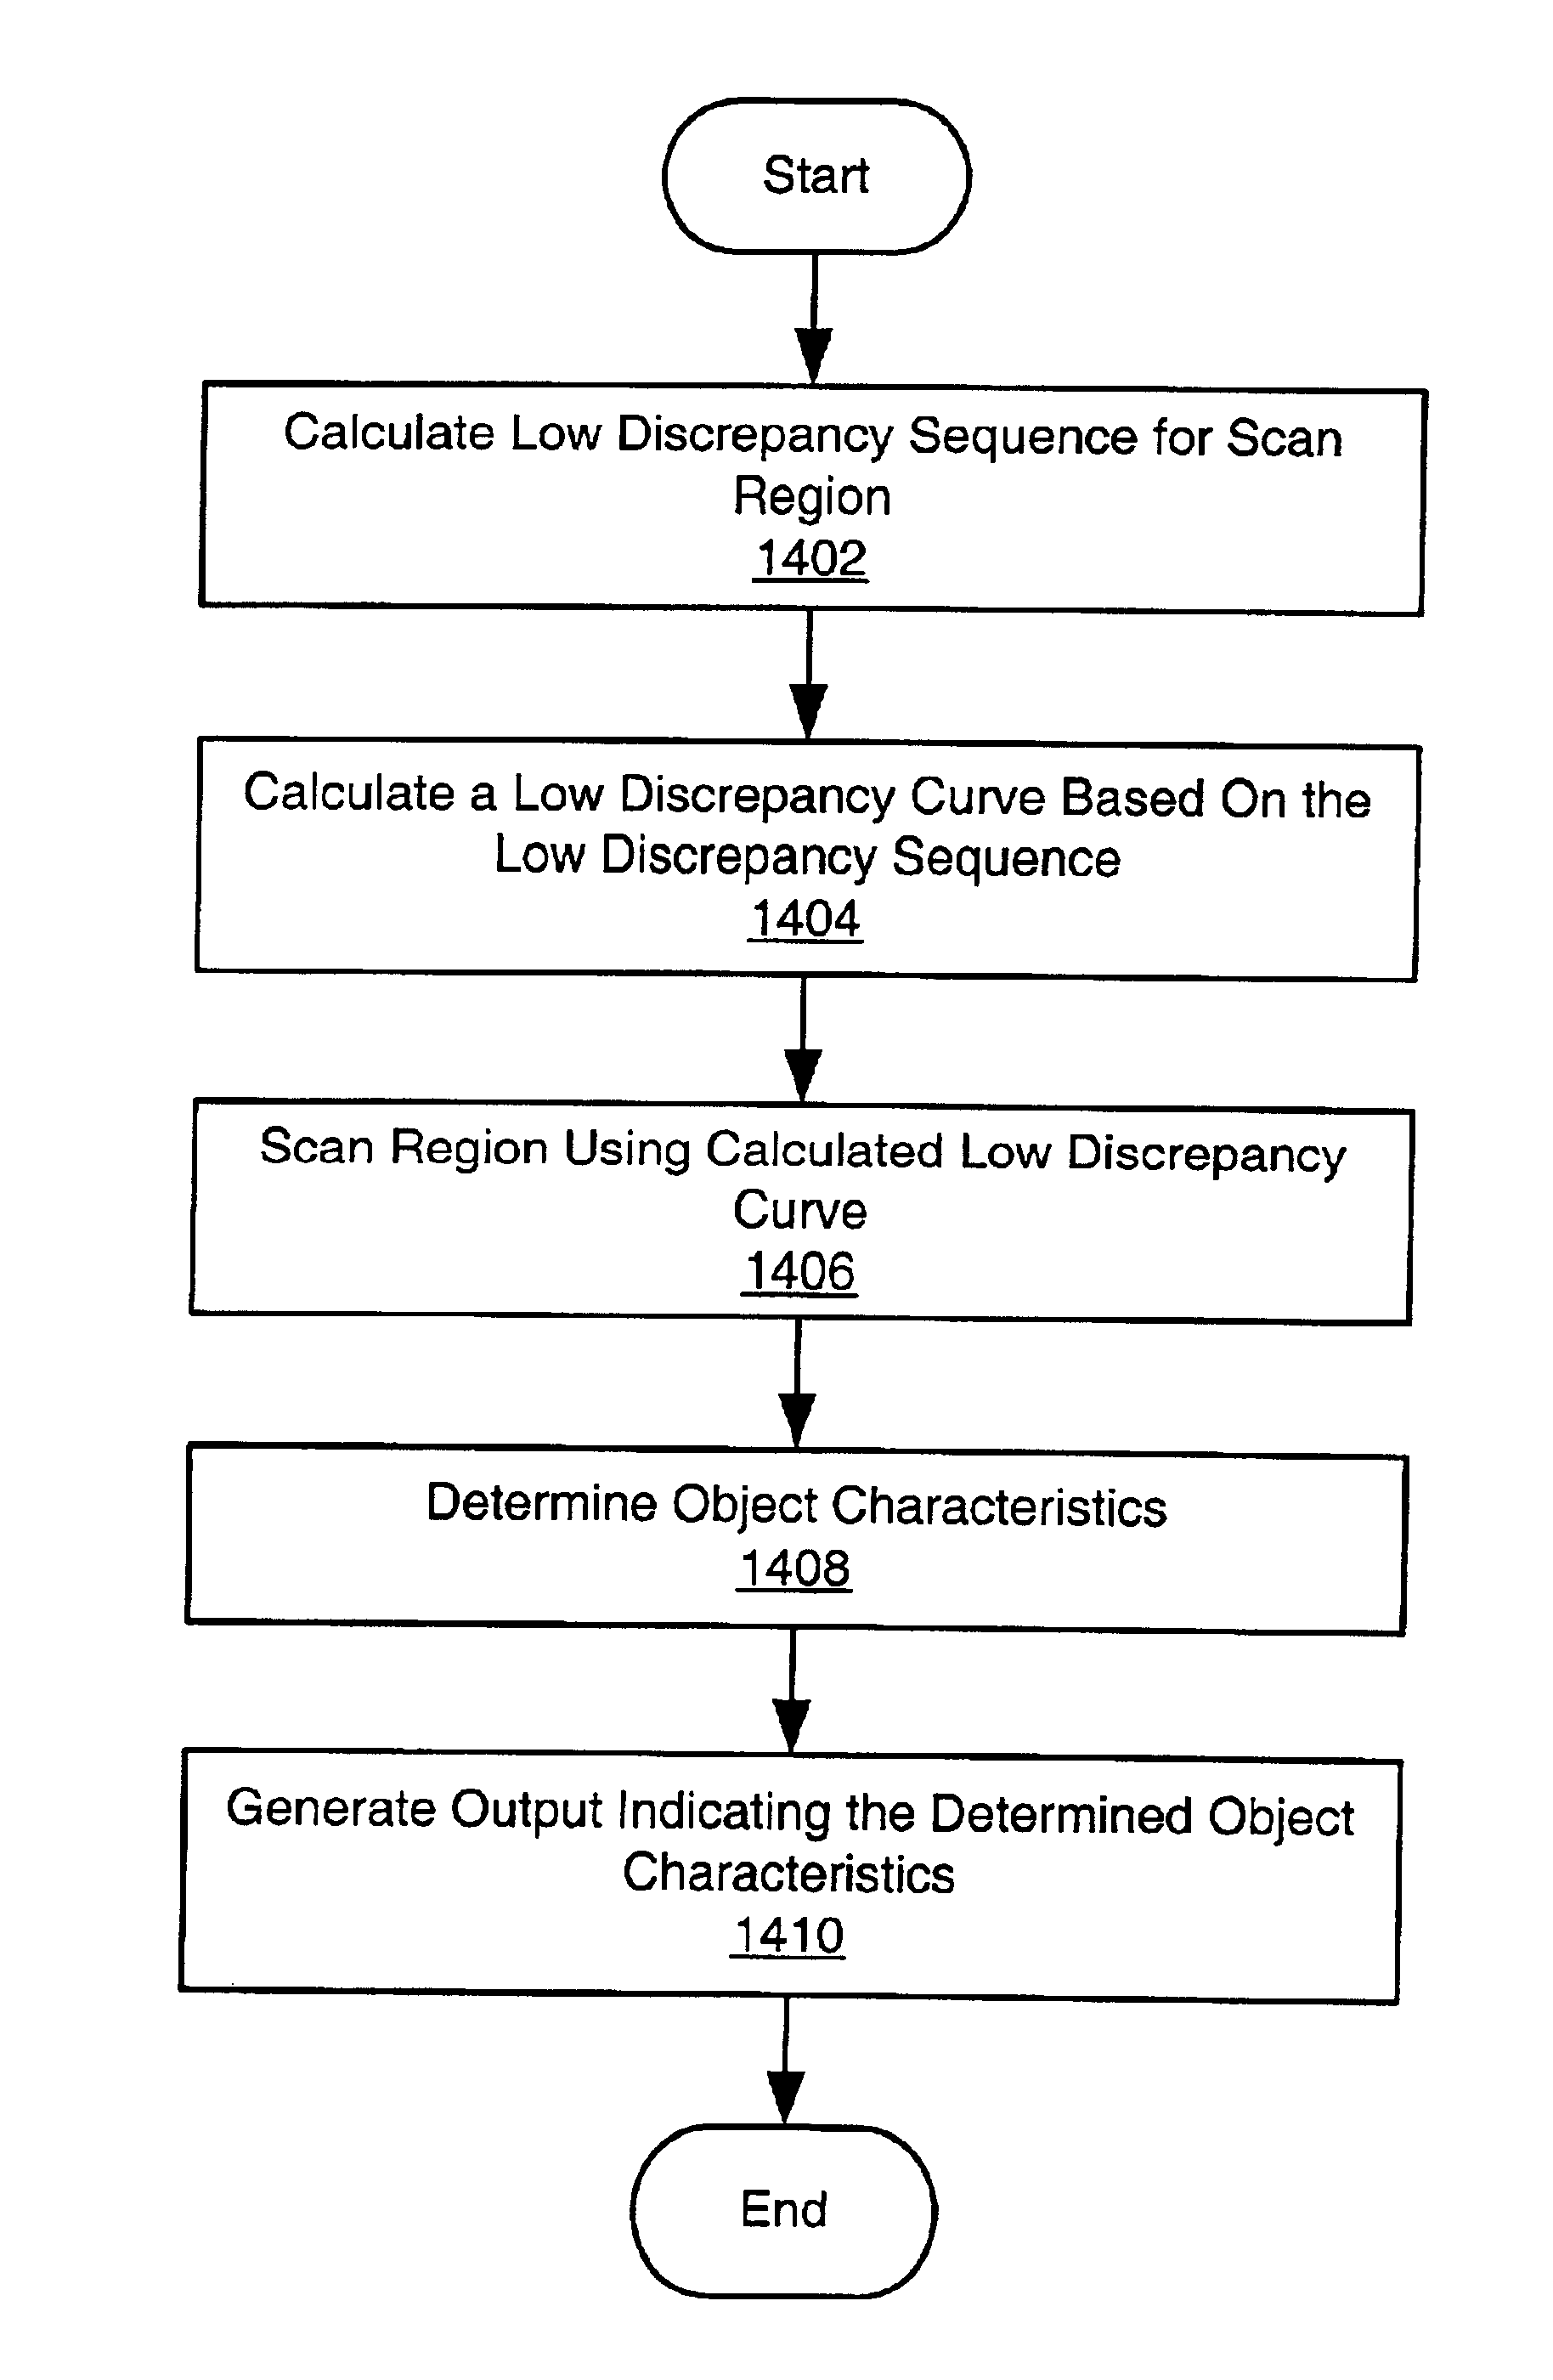 System and method for scanning a region using a low discrepancy curve